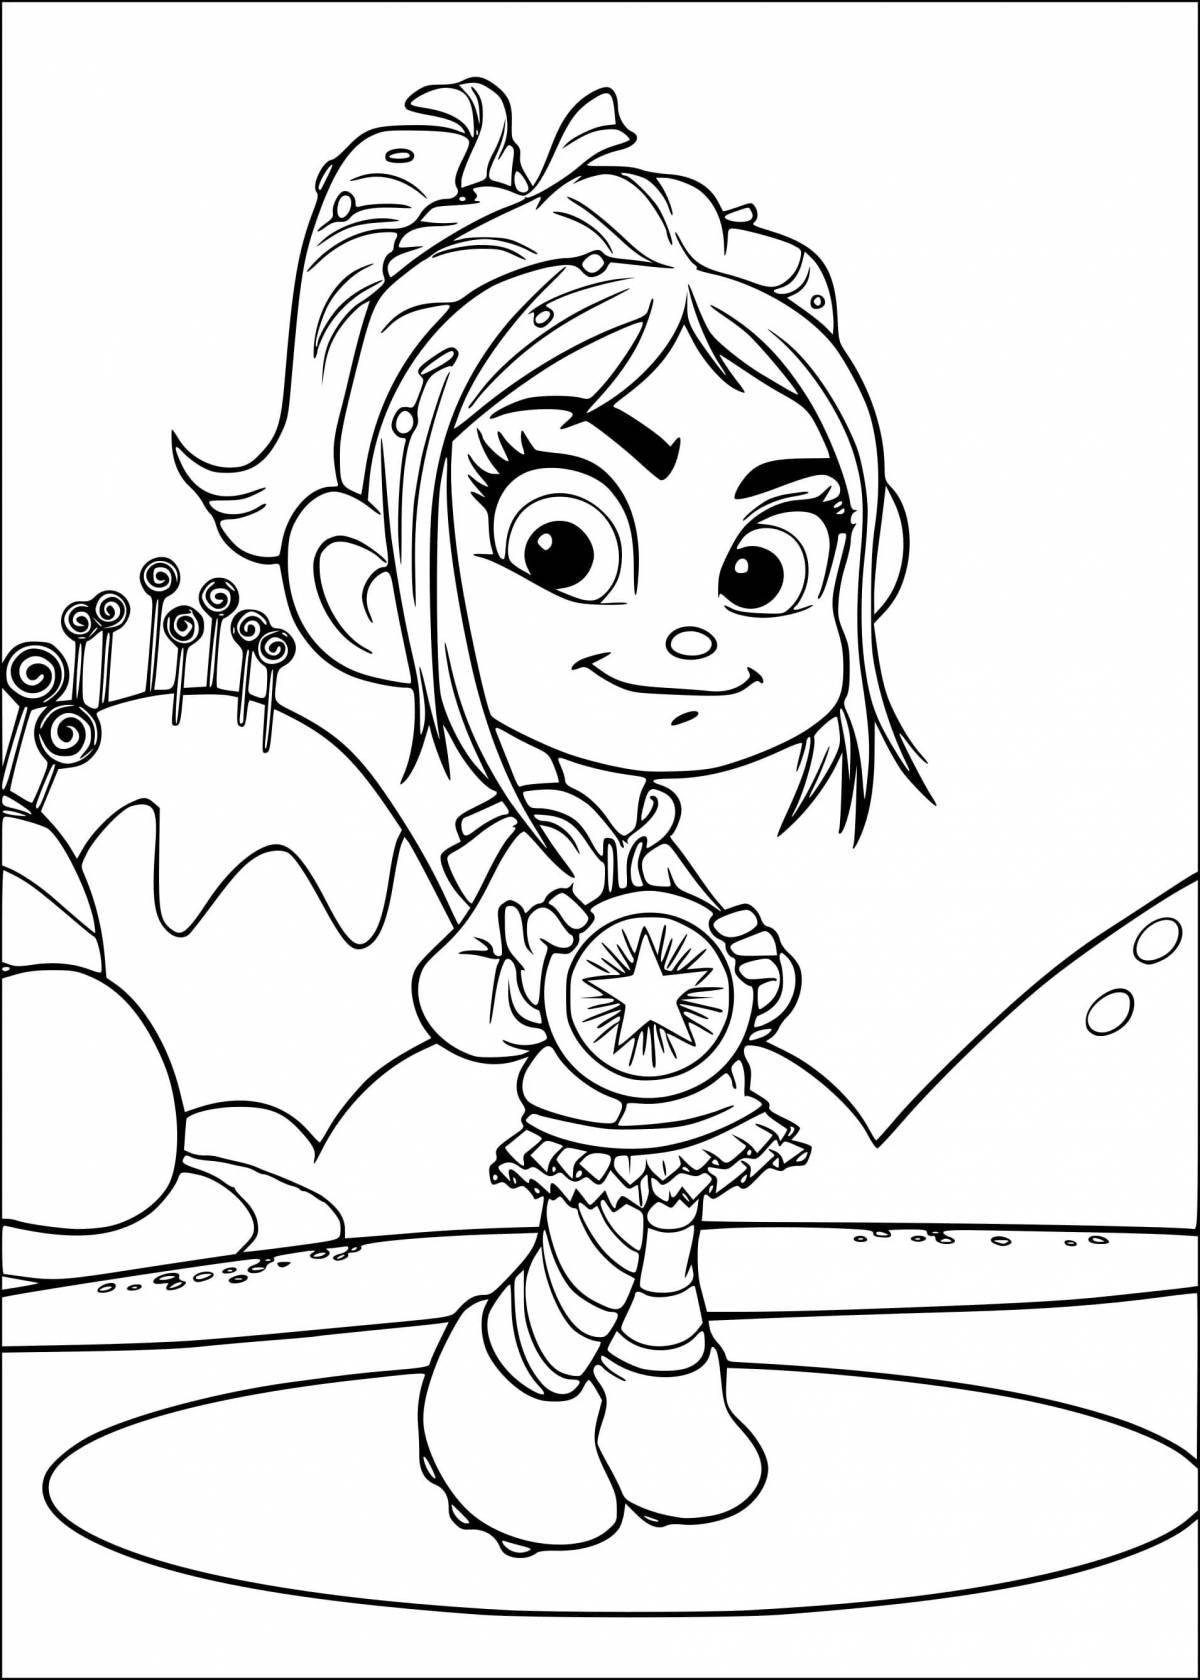 Color-explosion vanellope and ralph coloring page